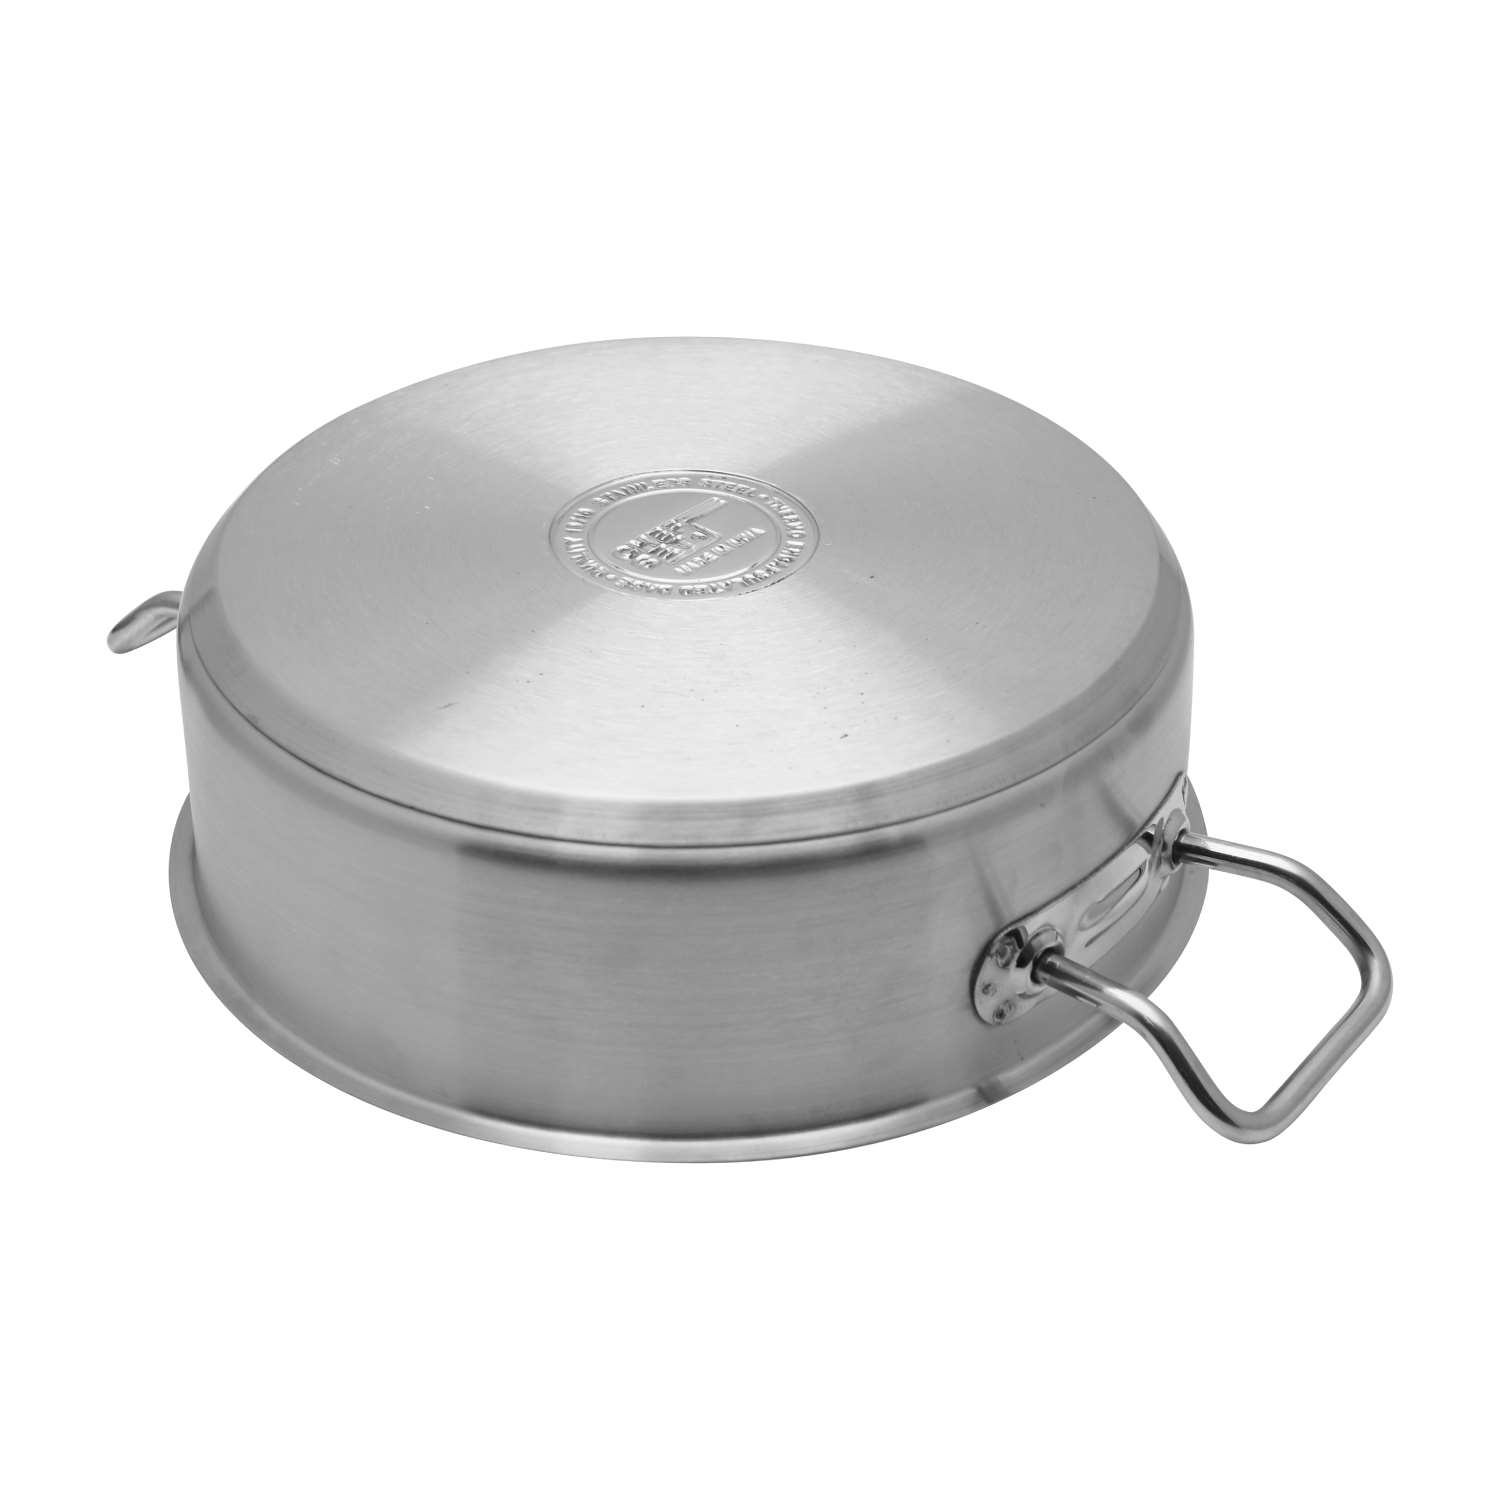 Chefset Steel Low Casserole Low Cooking Pot With Lid And Double Handle 26Cm